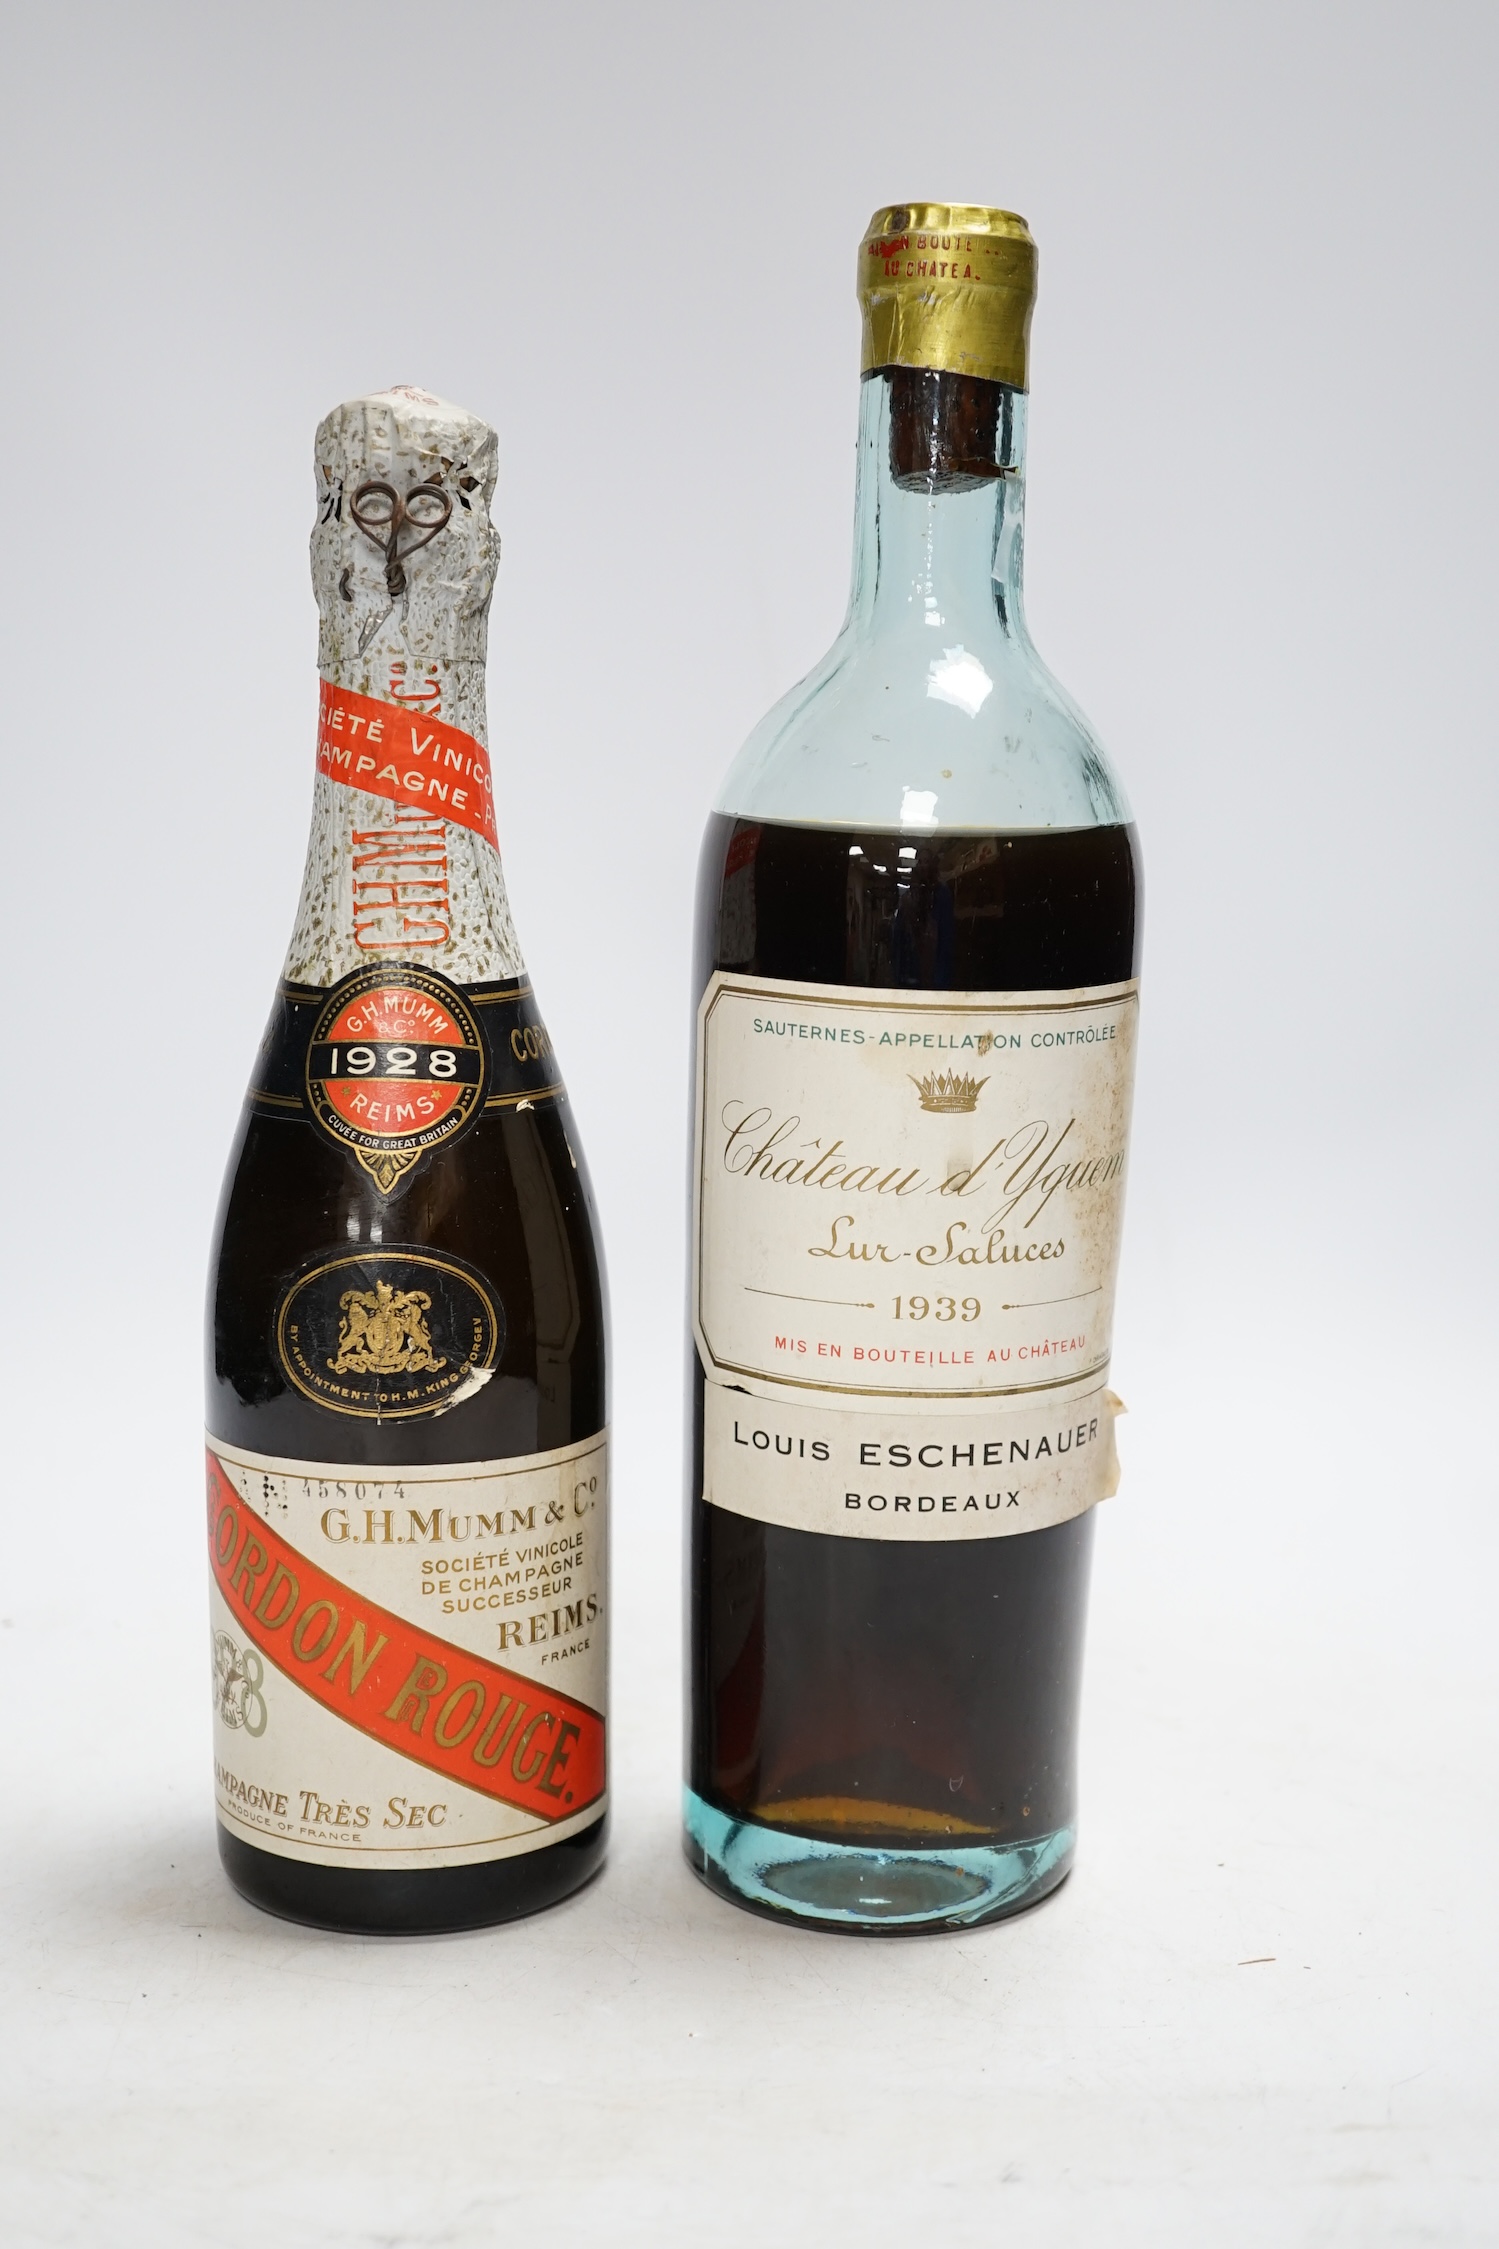 One bottle of Chateau d'Yquem 1939 and one half bottle of G.H. Mumm & Co 1928 Champagne